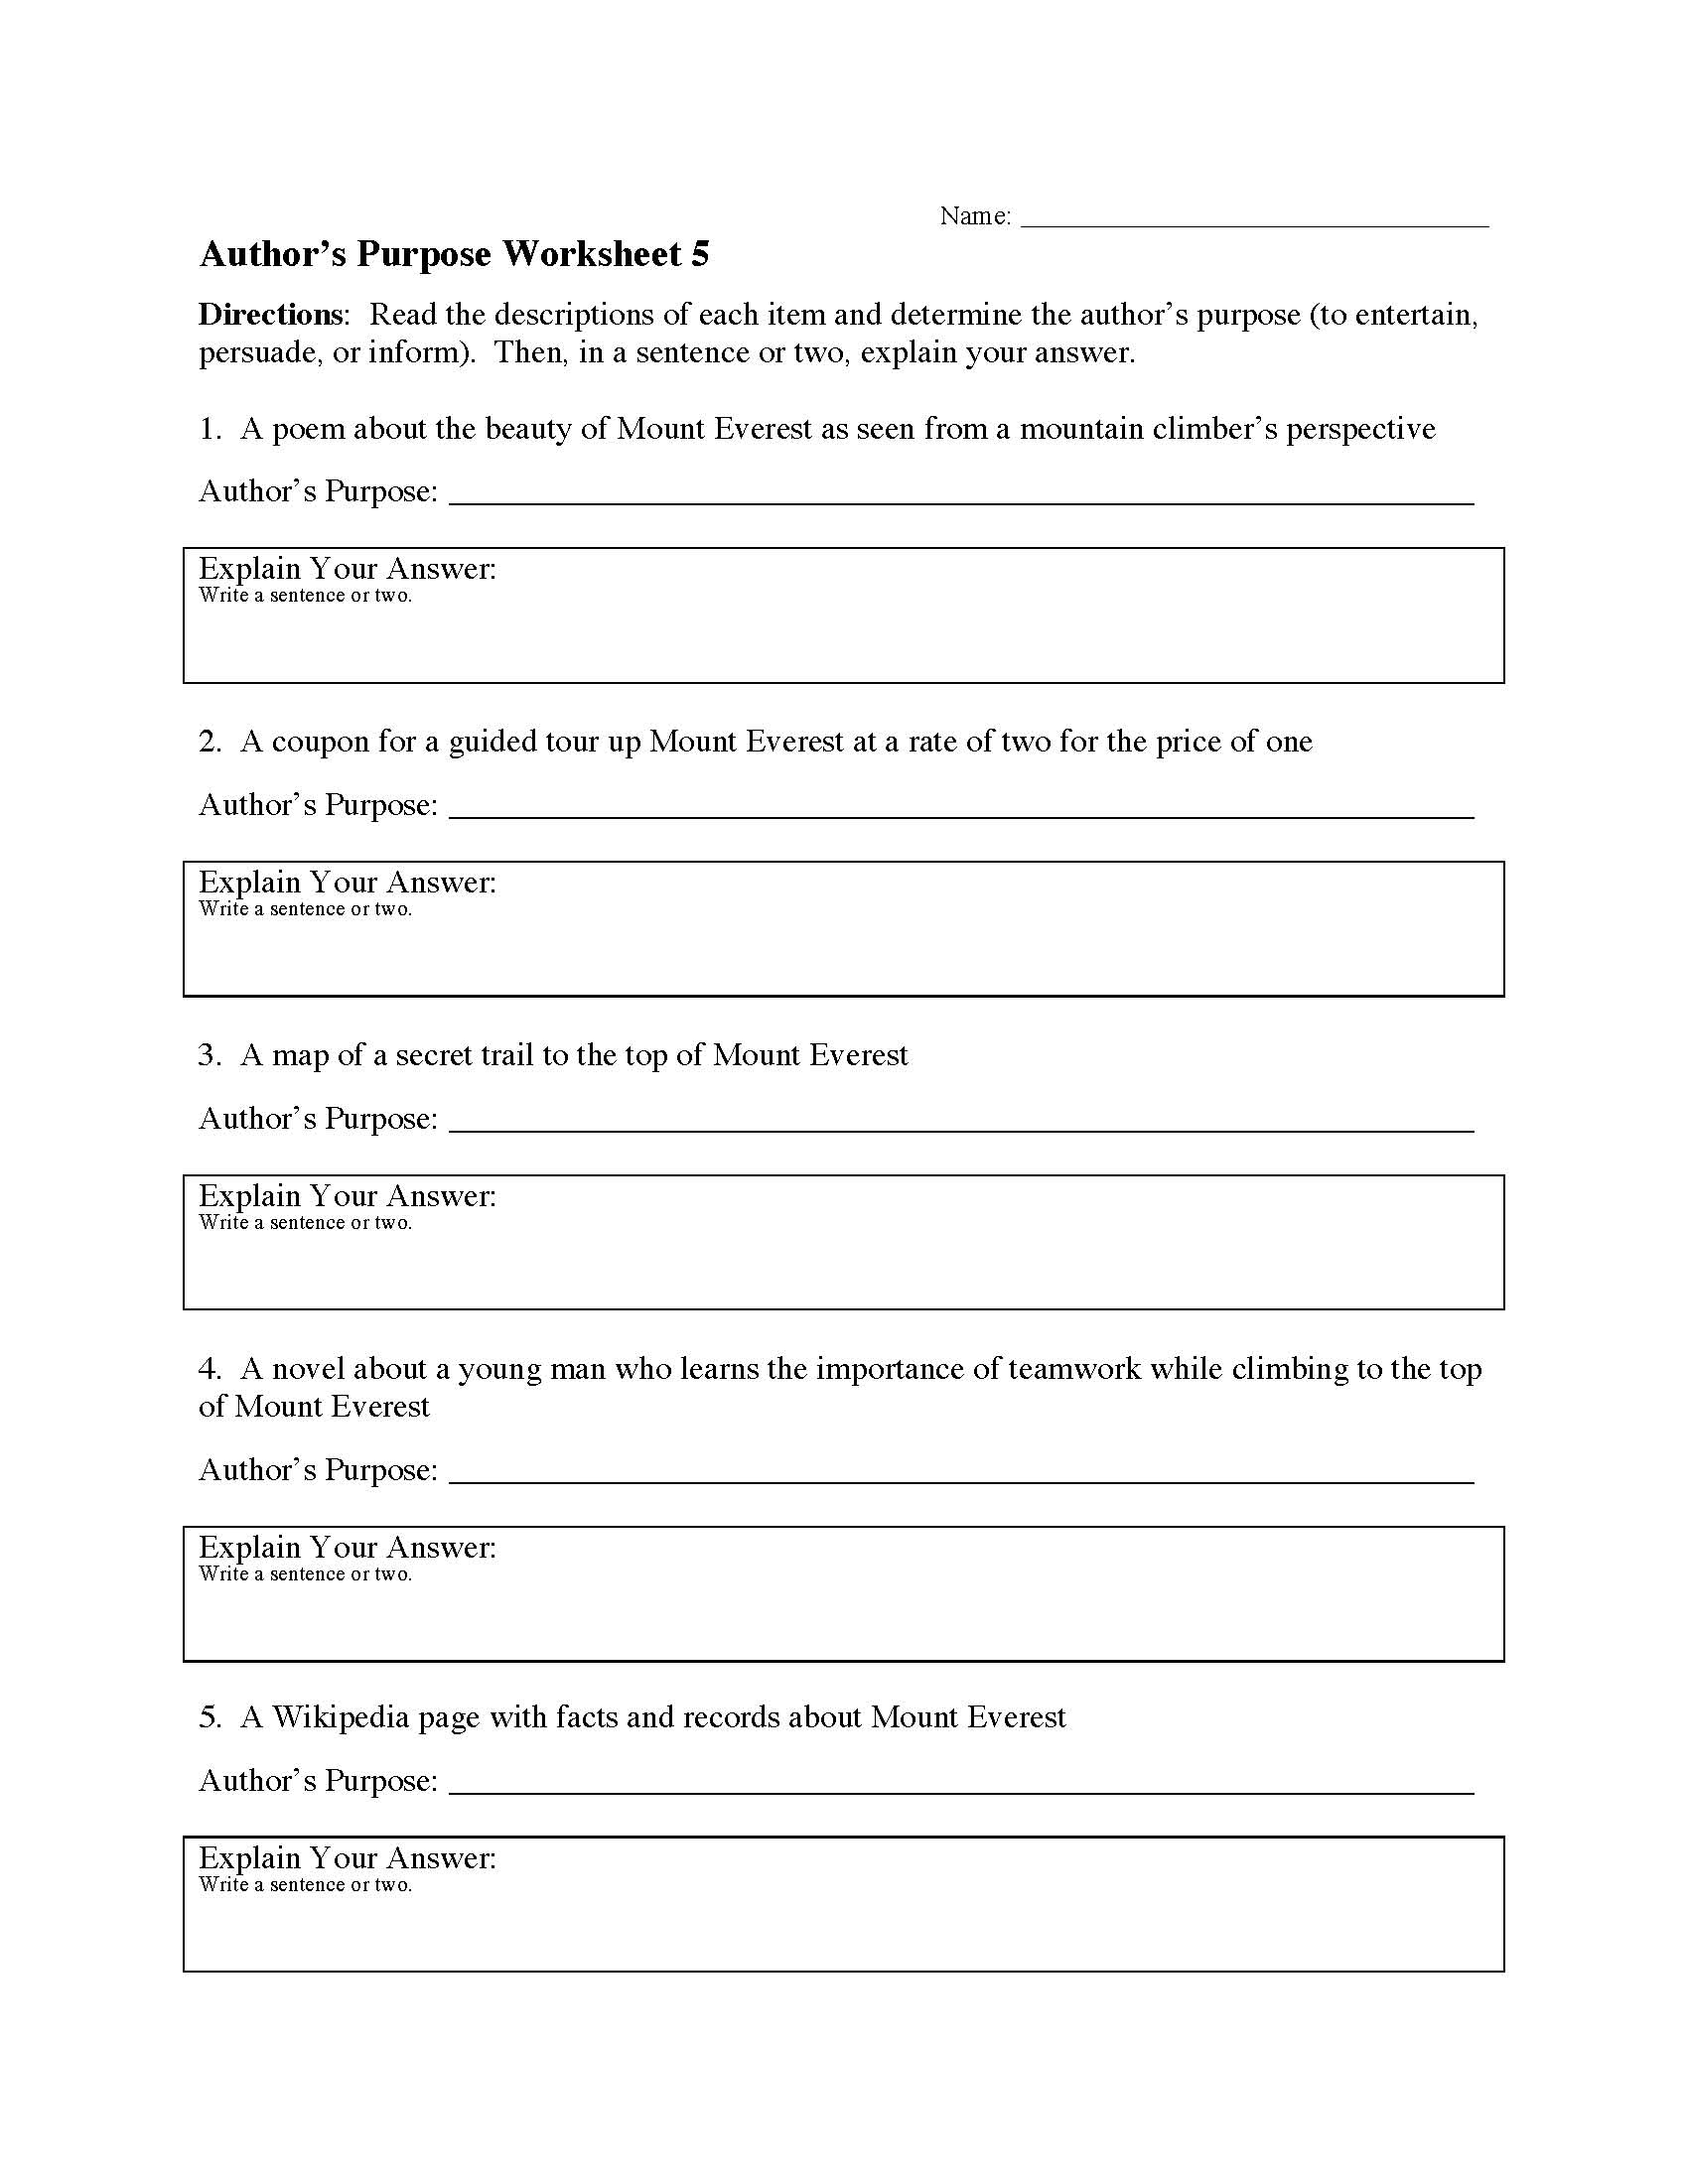 Author's Purpose Worksheet 5 | Preview